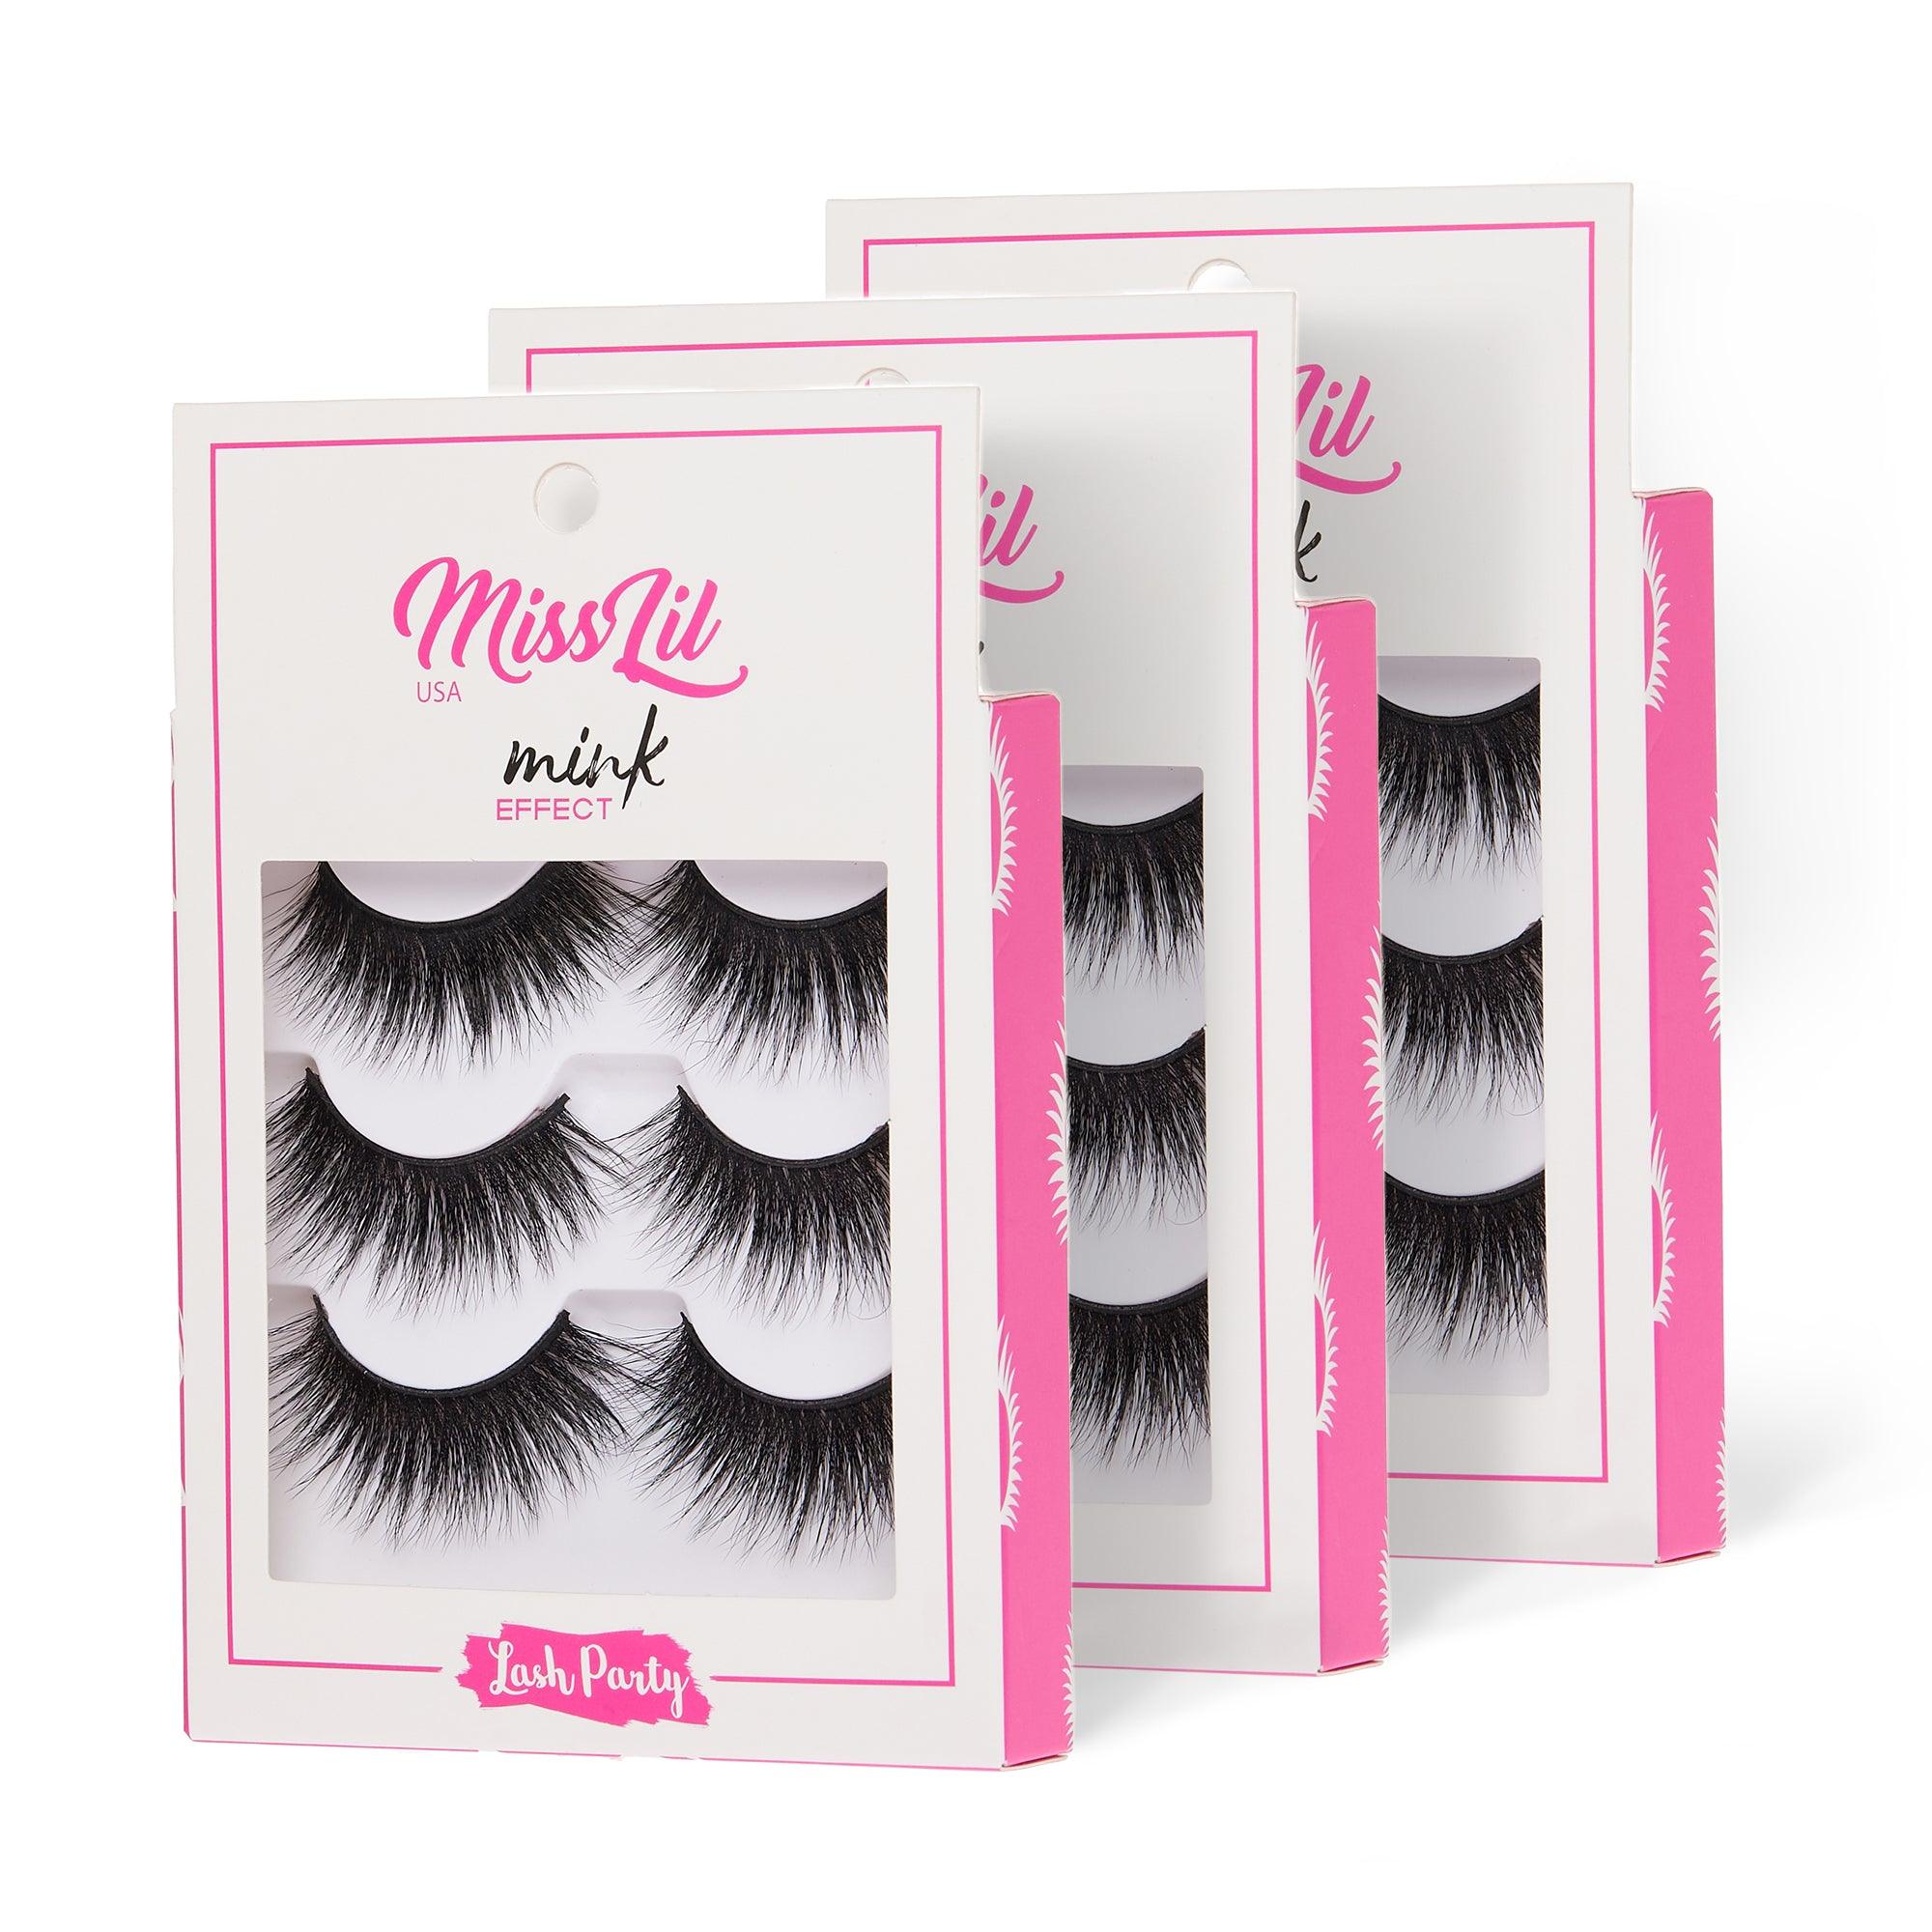 3-Pair Faux Mink Effect Eyelashes - Lash Party Collection #4 - Pack of 3 - Miss Lil USA